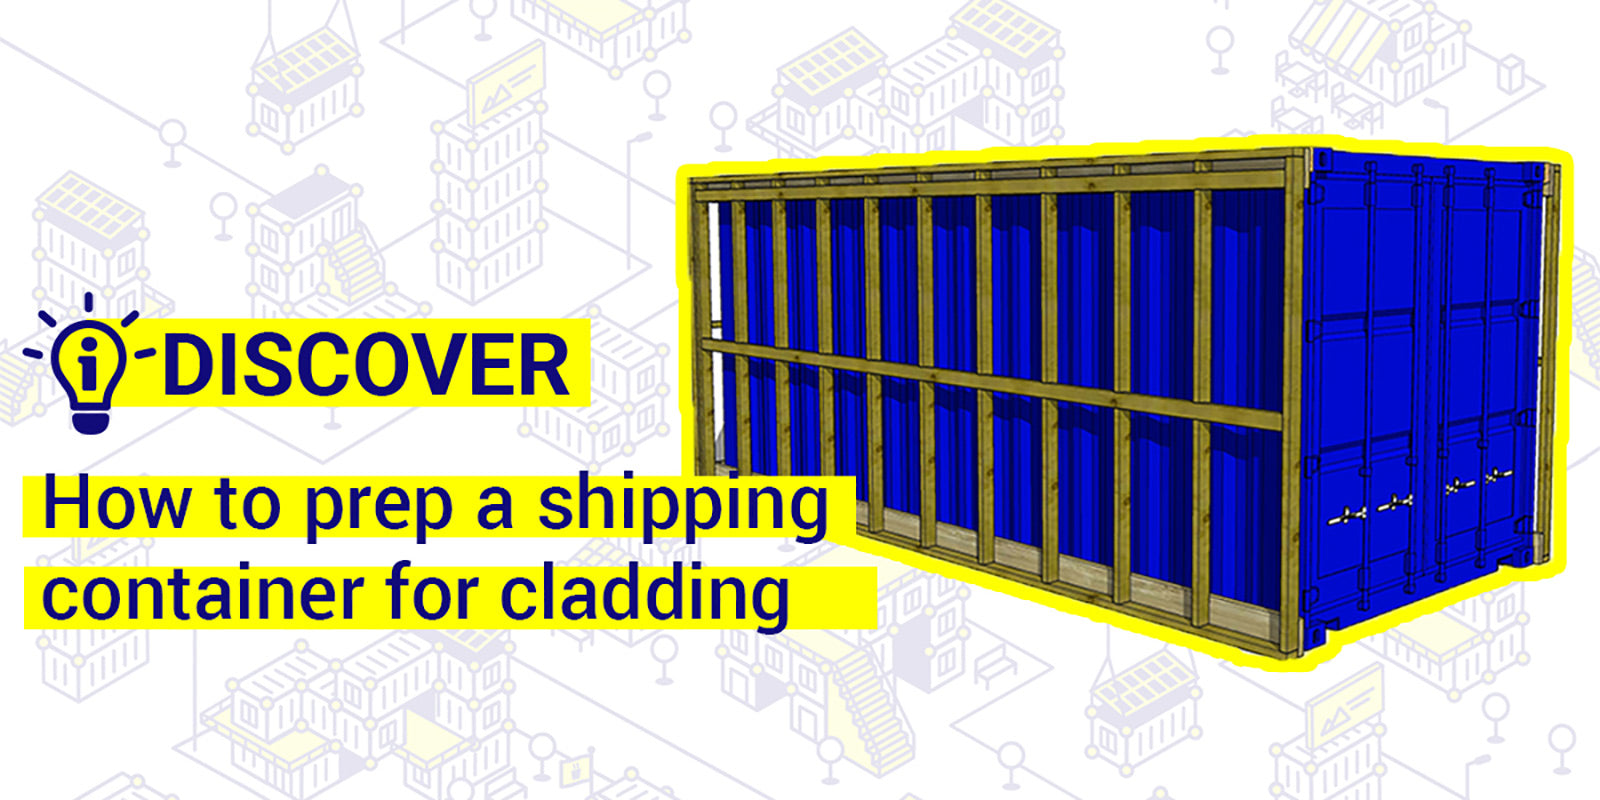 How to prep a shipping container for cladding - An image of a shipping container with battens attached.